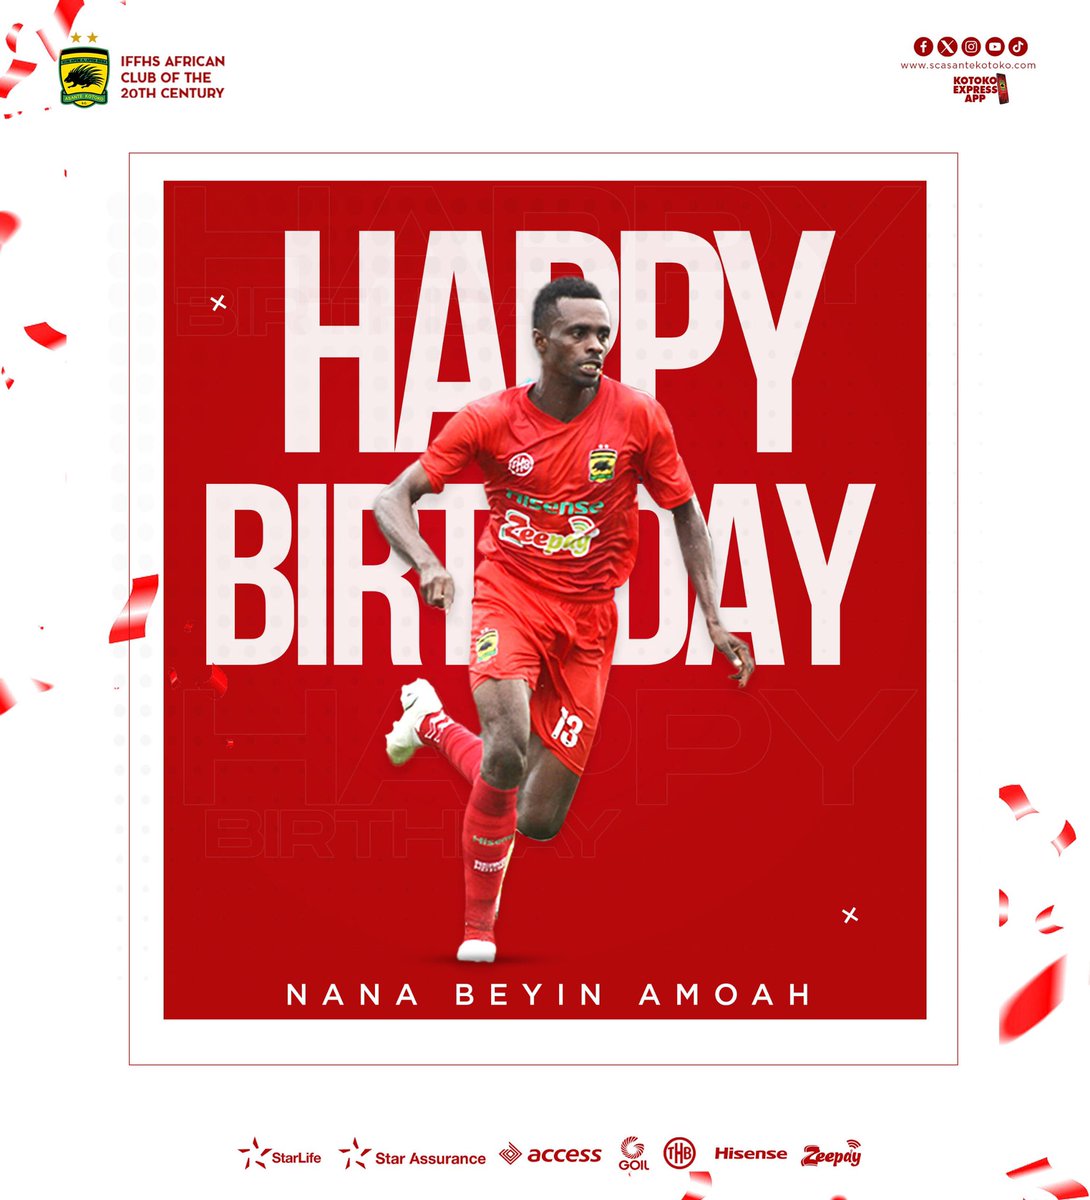 Birthday wishes to our left-back Nana Beyin Amoah  🎉 

Have a fabulous day 😃

#AKSC #Fabucensus #Kotoko4All